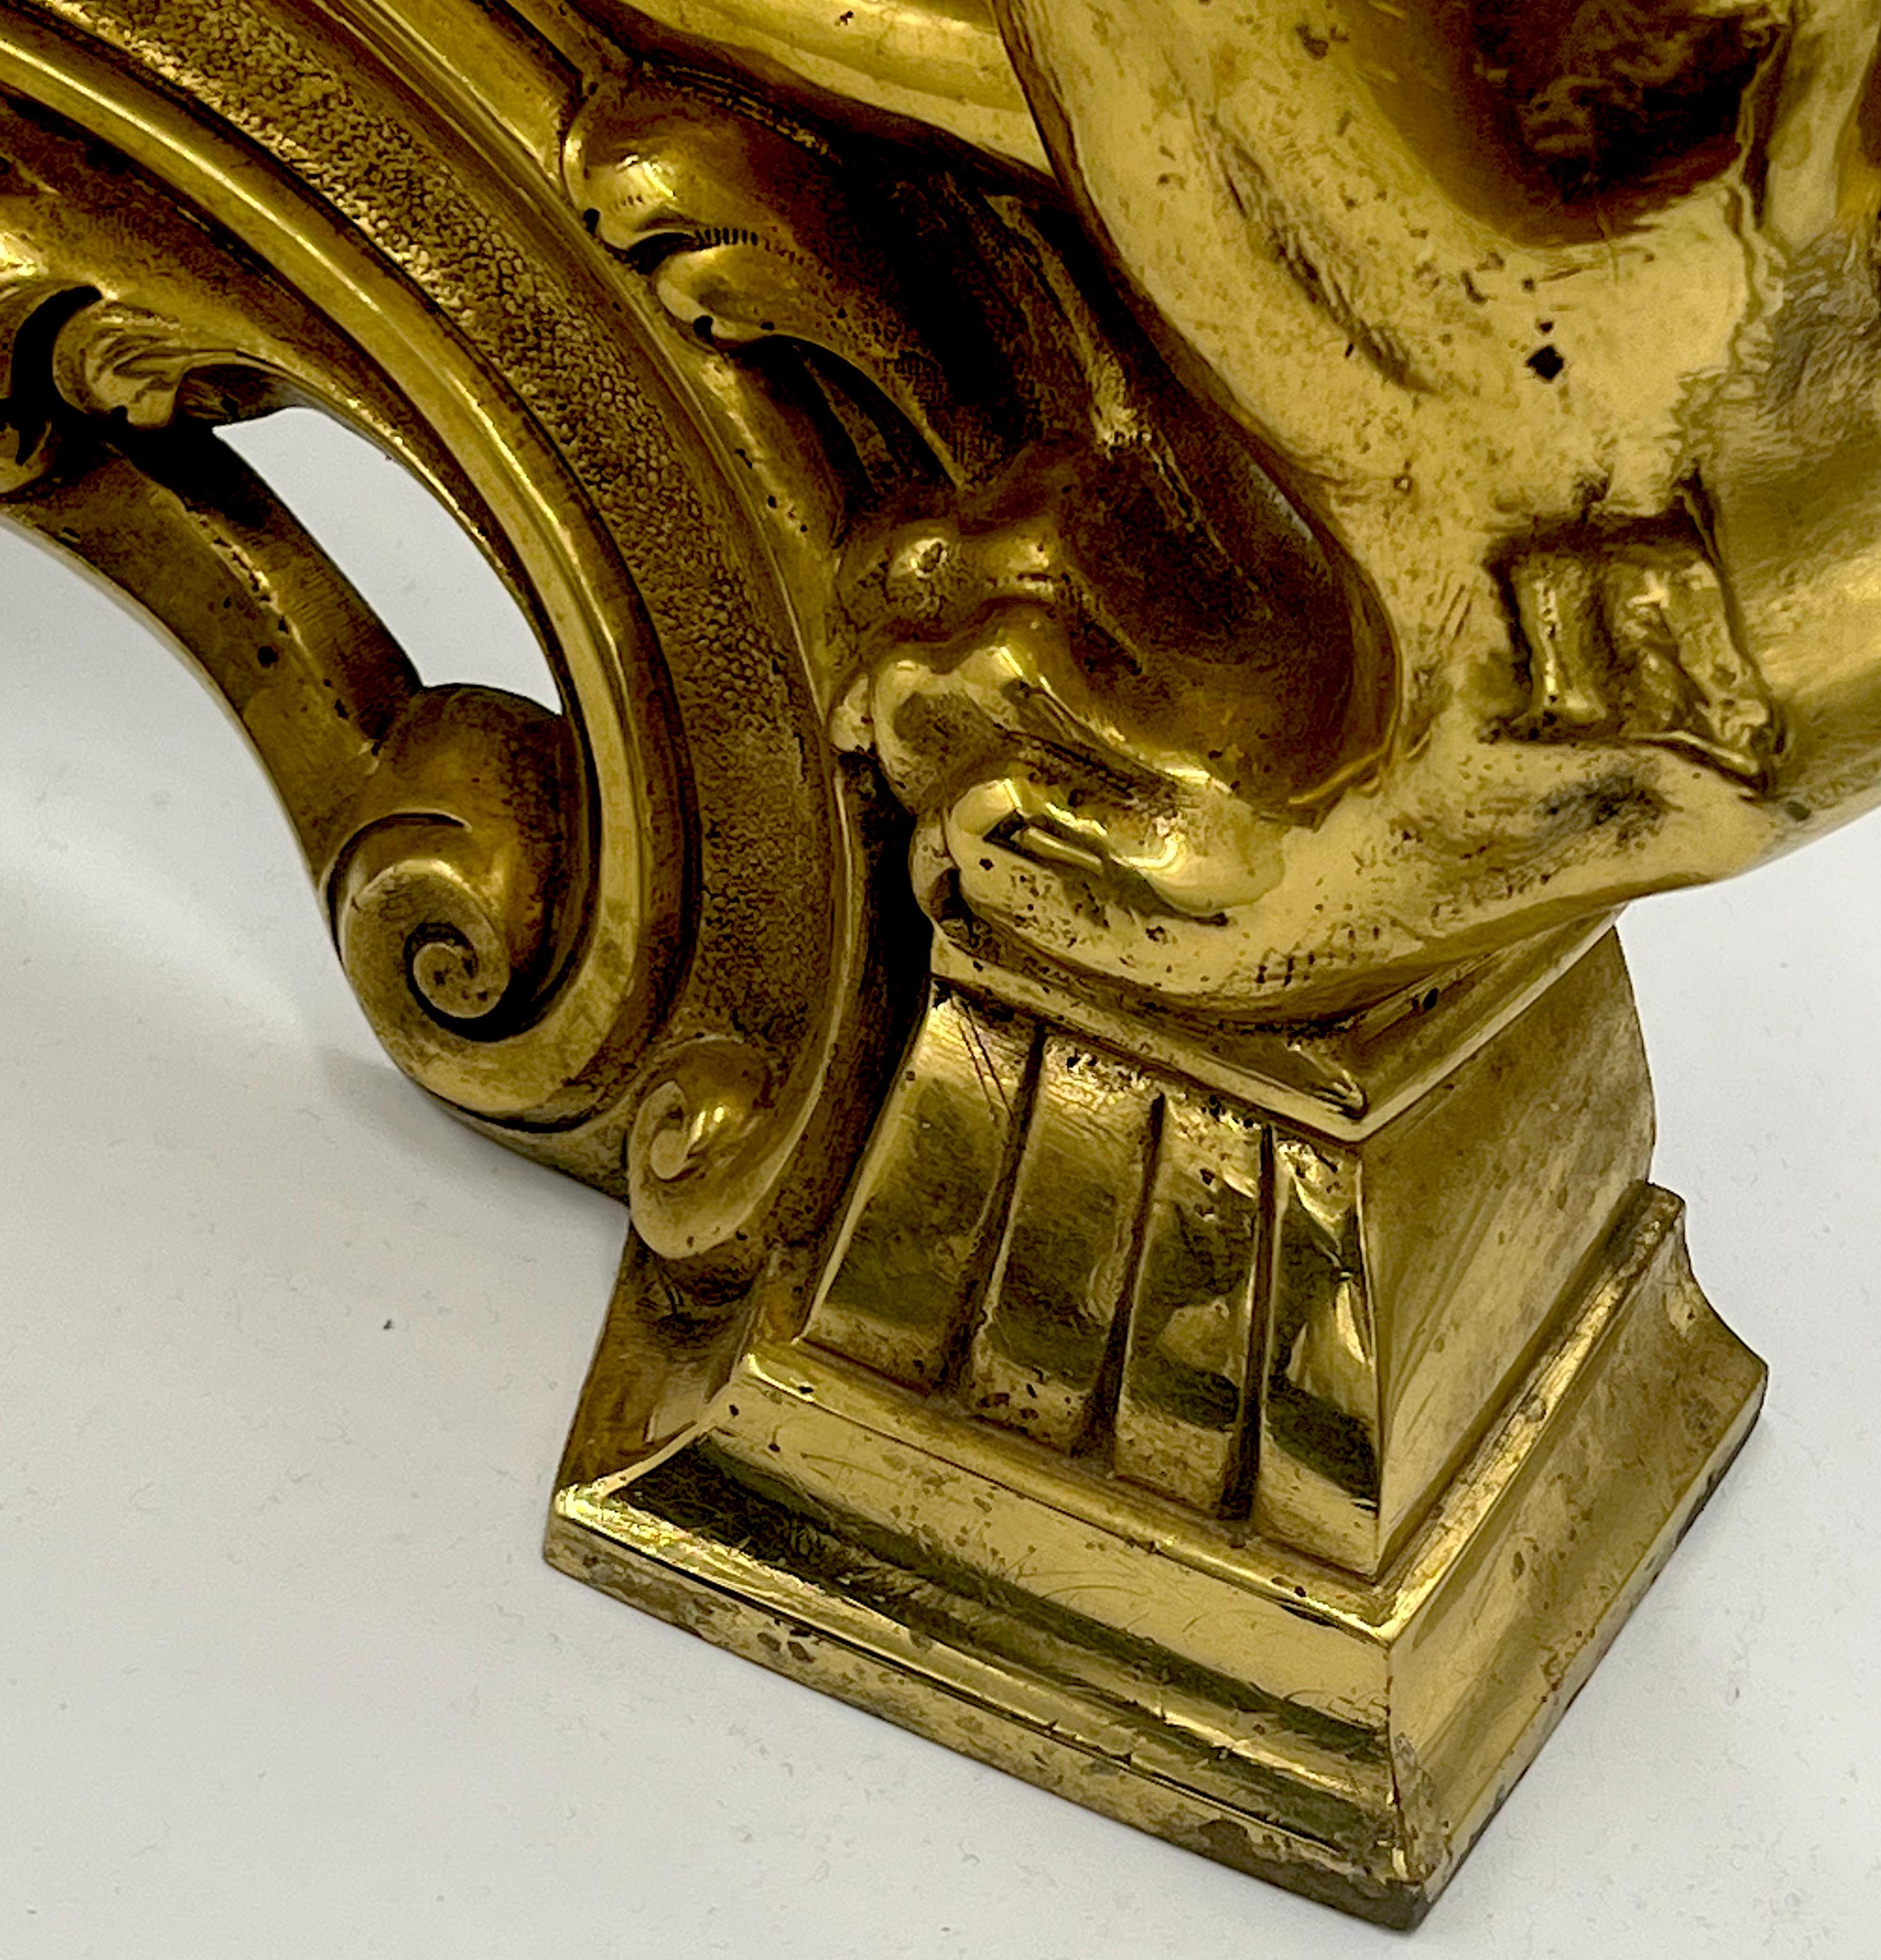 Important pair of gilded and finely chiselled bronze androni in Louis XVI style. They are surmounted by lions reclining on a base depicting a coat of arms of a Tuscan noble family and with trimmings facing the fire pots. The lions are very well